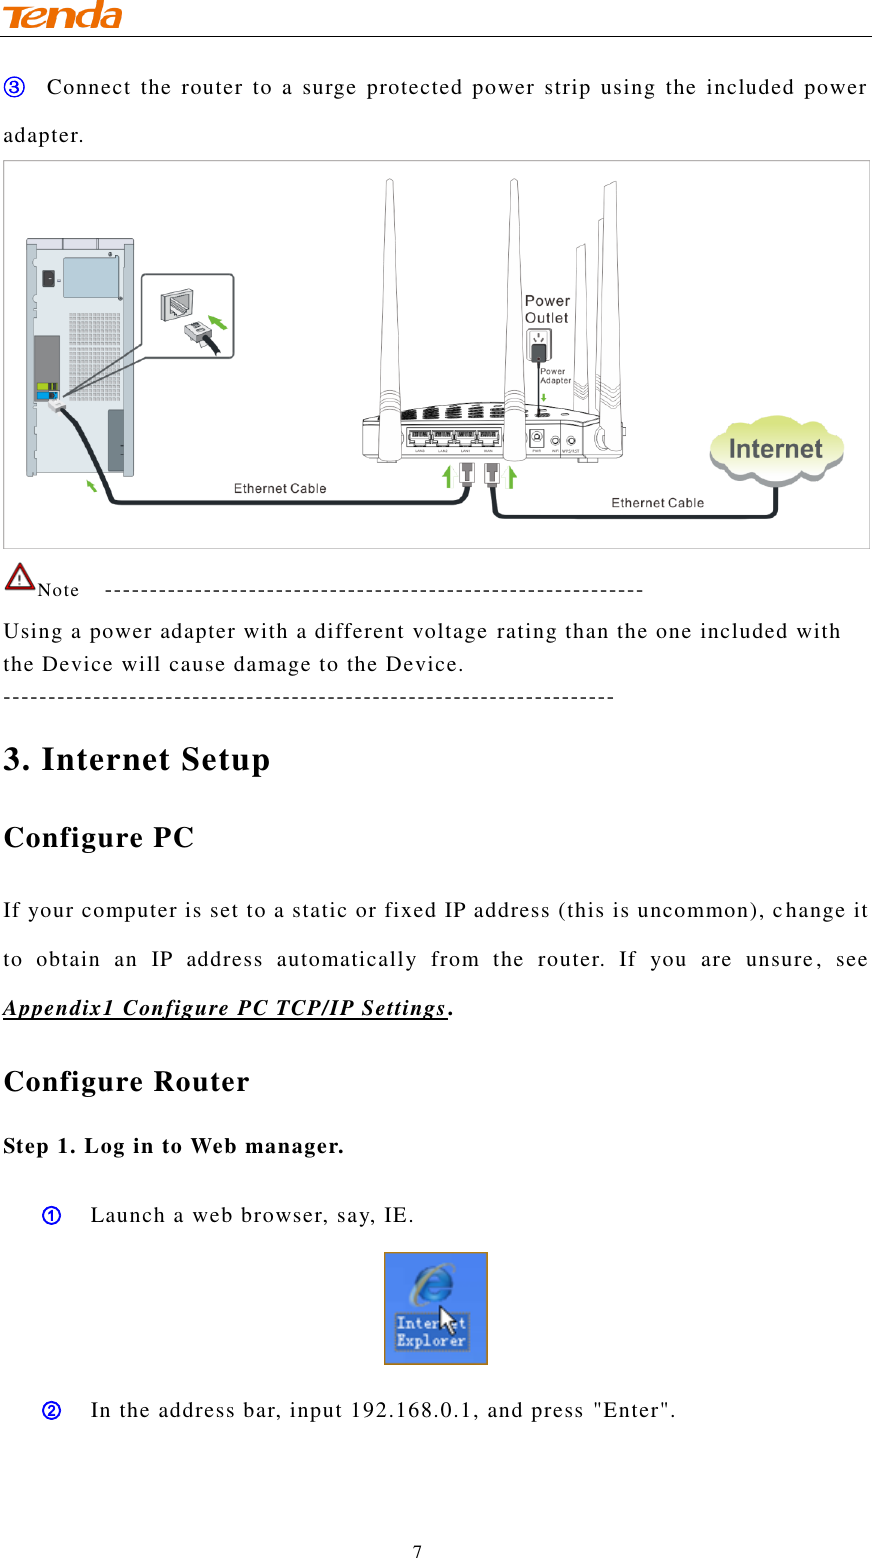                                    7 ③ Connect the  router  to a  surge protected  power  strip  using  the  included  power adapter.  Note   ------------------------------------------------------------ Using a power adapter with a different voltage rating than the one included with the Device will cause damage to the Device. -------------------------------------------------------------------- 3. Internet Setup Configure PC If your computer is set to a static or fixed IP address (this is uncommon), c hange it to  obtain  an  IP  address  automatically  from  the  router.  If  you  are  unsure,  see Appendix1 Configure PC TCP/IP Settings. Configure Router Step 1. Log in to Web manager. ① Launch a web browser, say, IE.  ② In the address bar, input 192.168.0.1, and press &quot;Enter&quot;. 